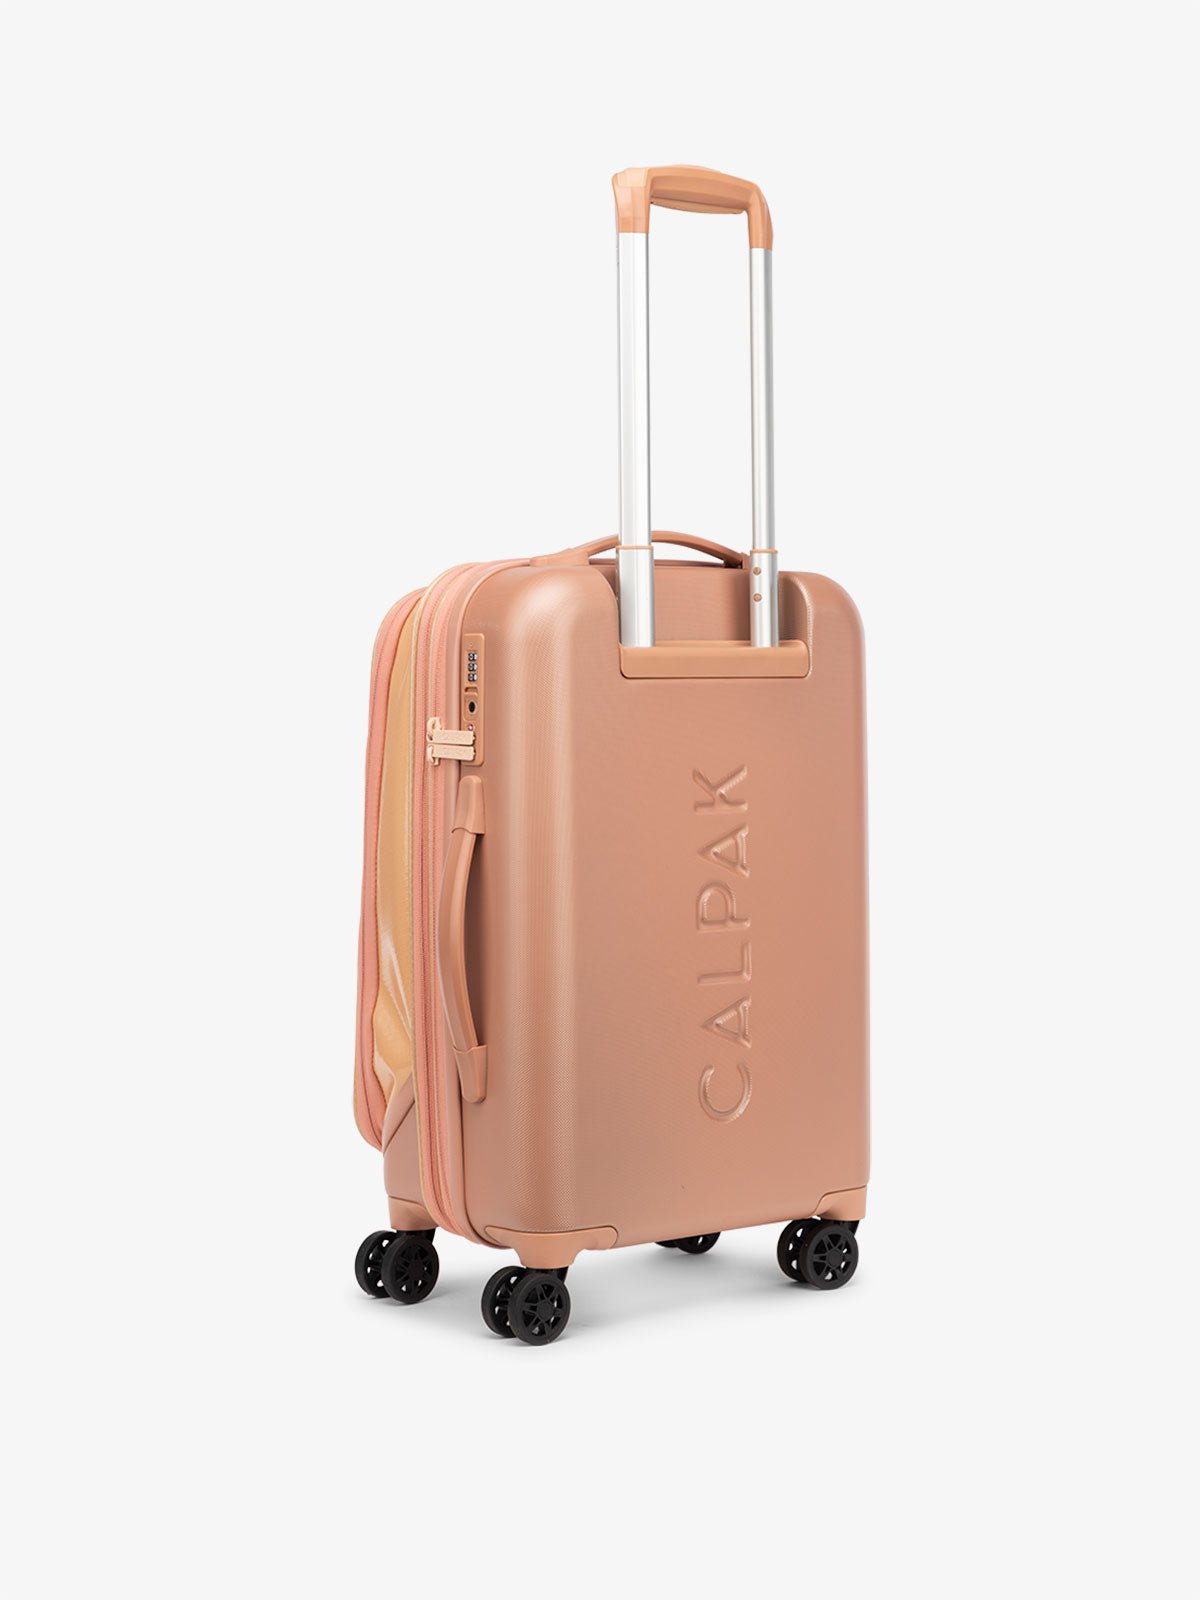 CALPAK Terra soft and hard shell carry-on luggage in canyon